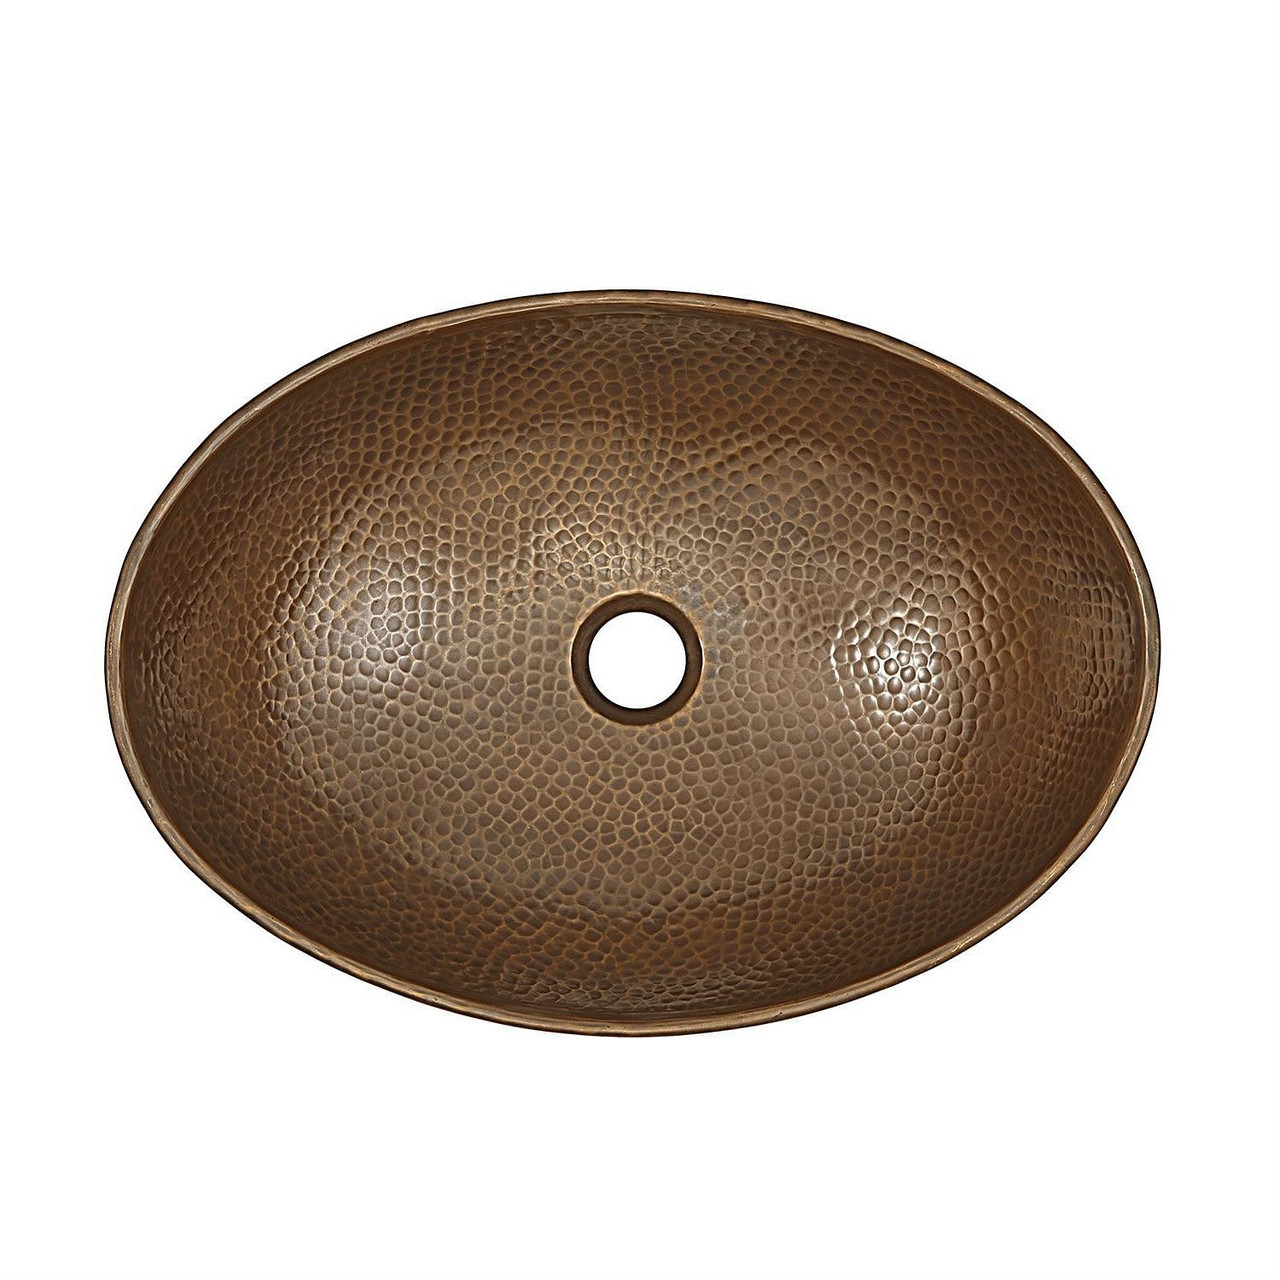 Hammered Copper Bath Vessel Sink Oval 19 x 14 inch